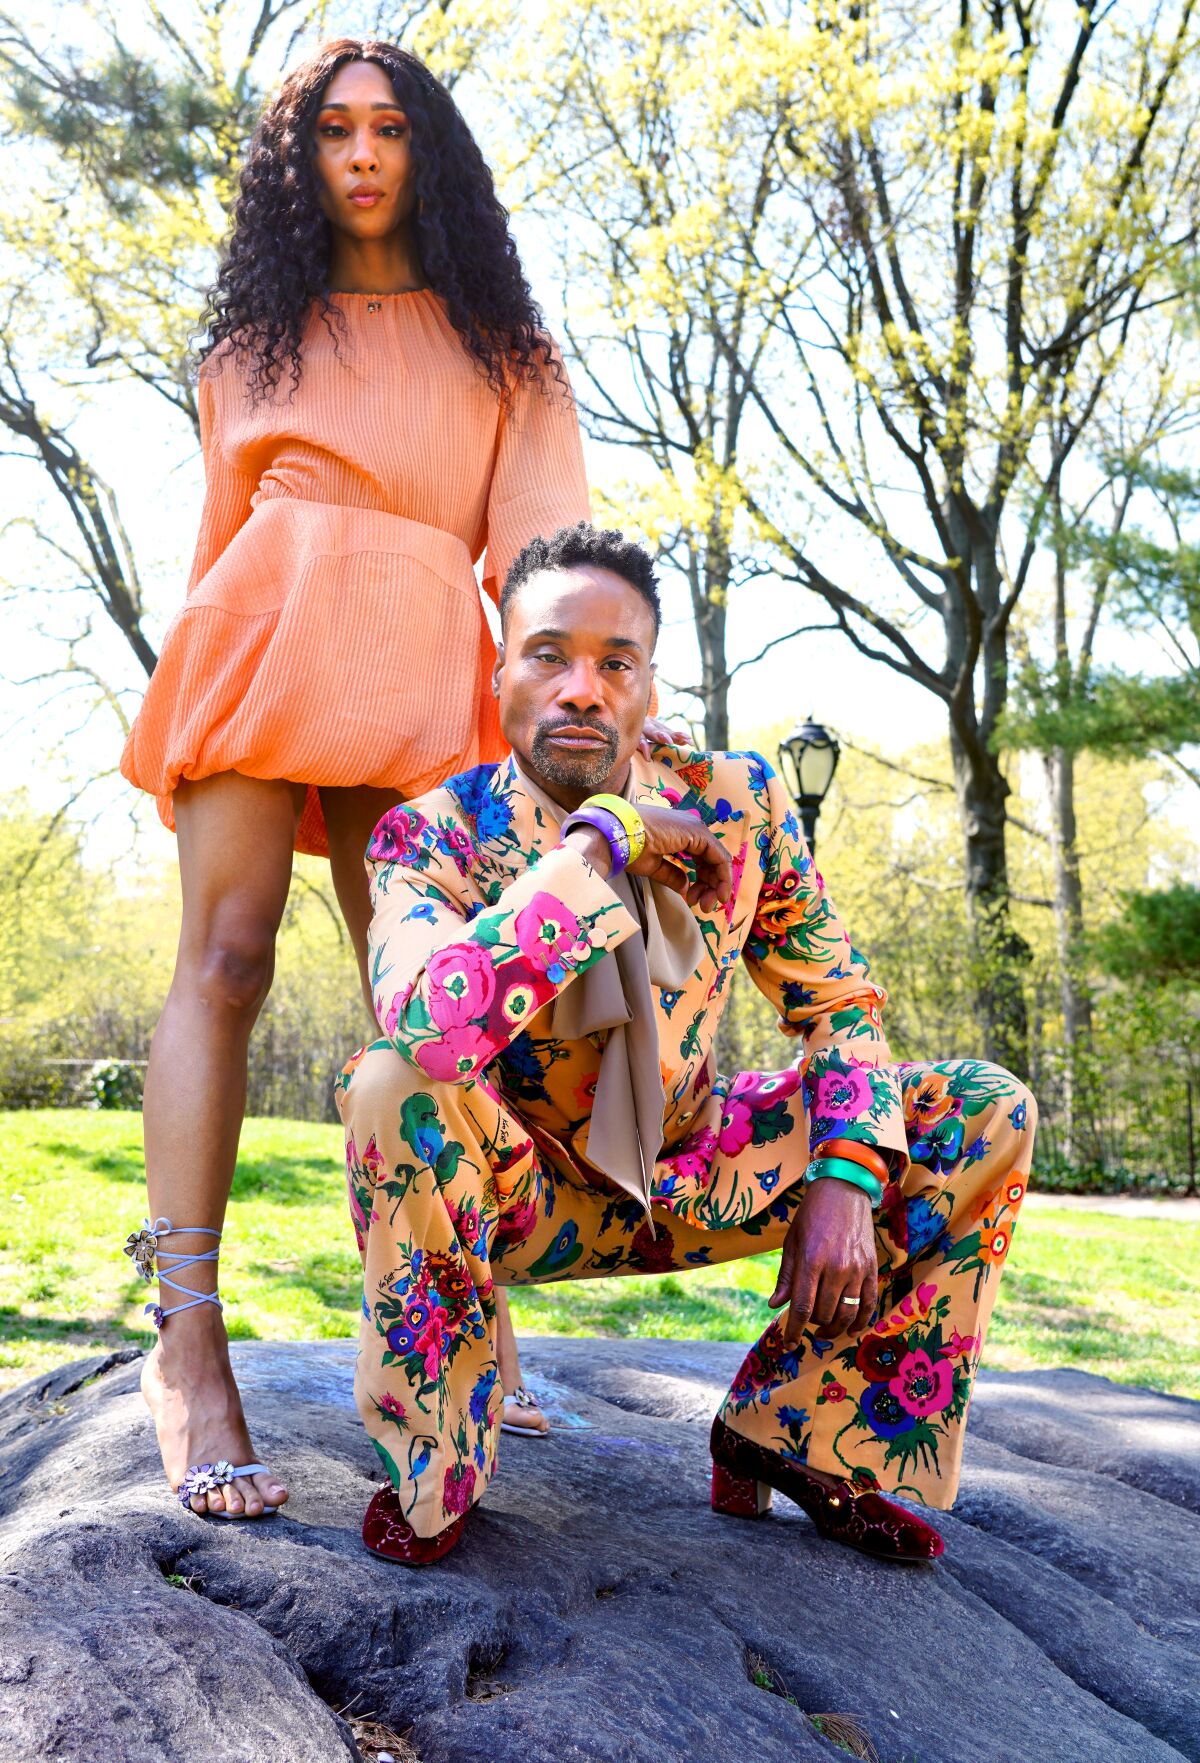 "Pose" costars Billy Porter and Mj Rodriguez on a rock in New York’s Central Park. 